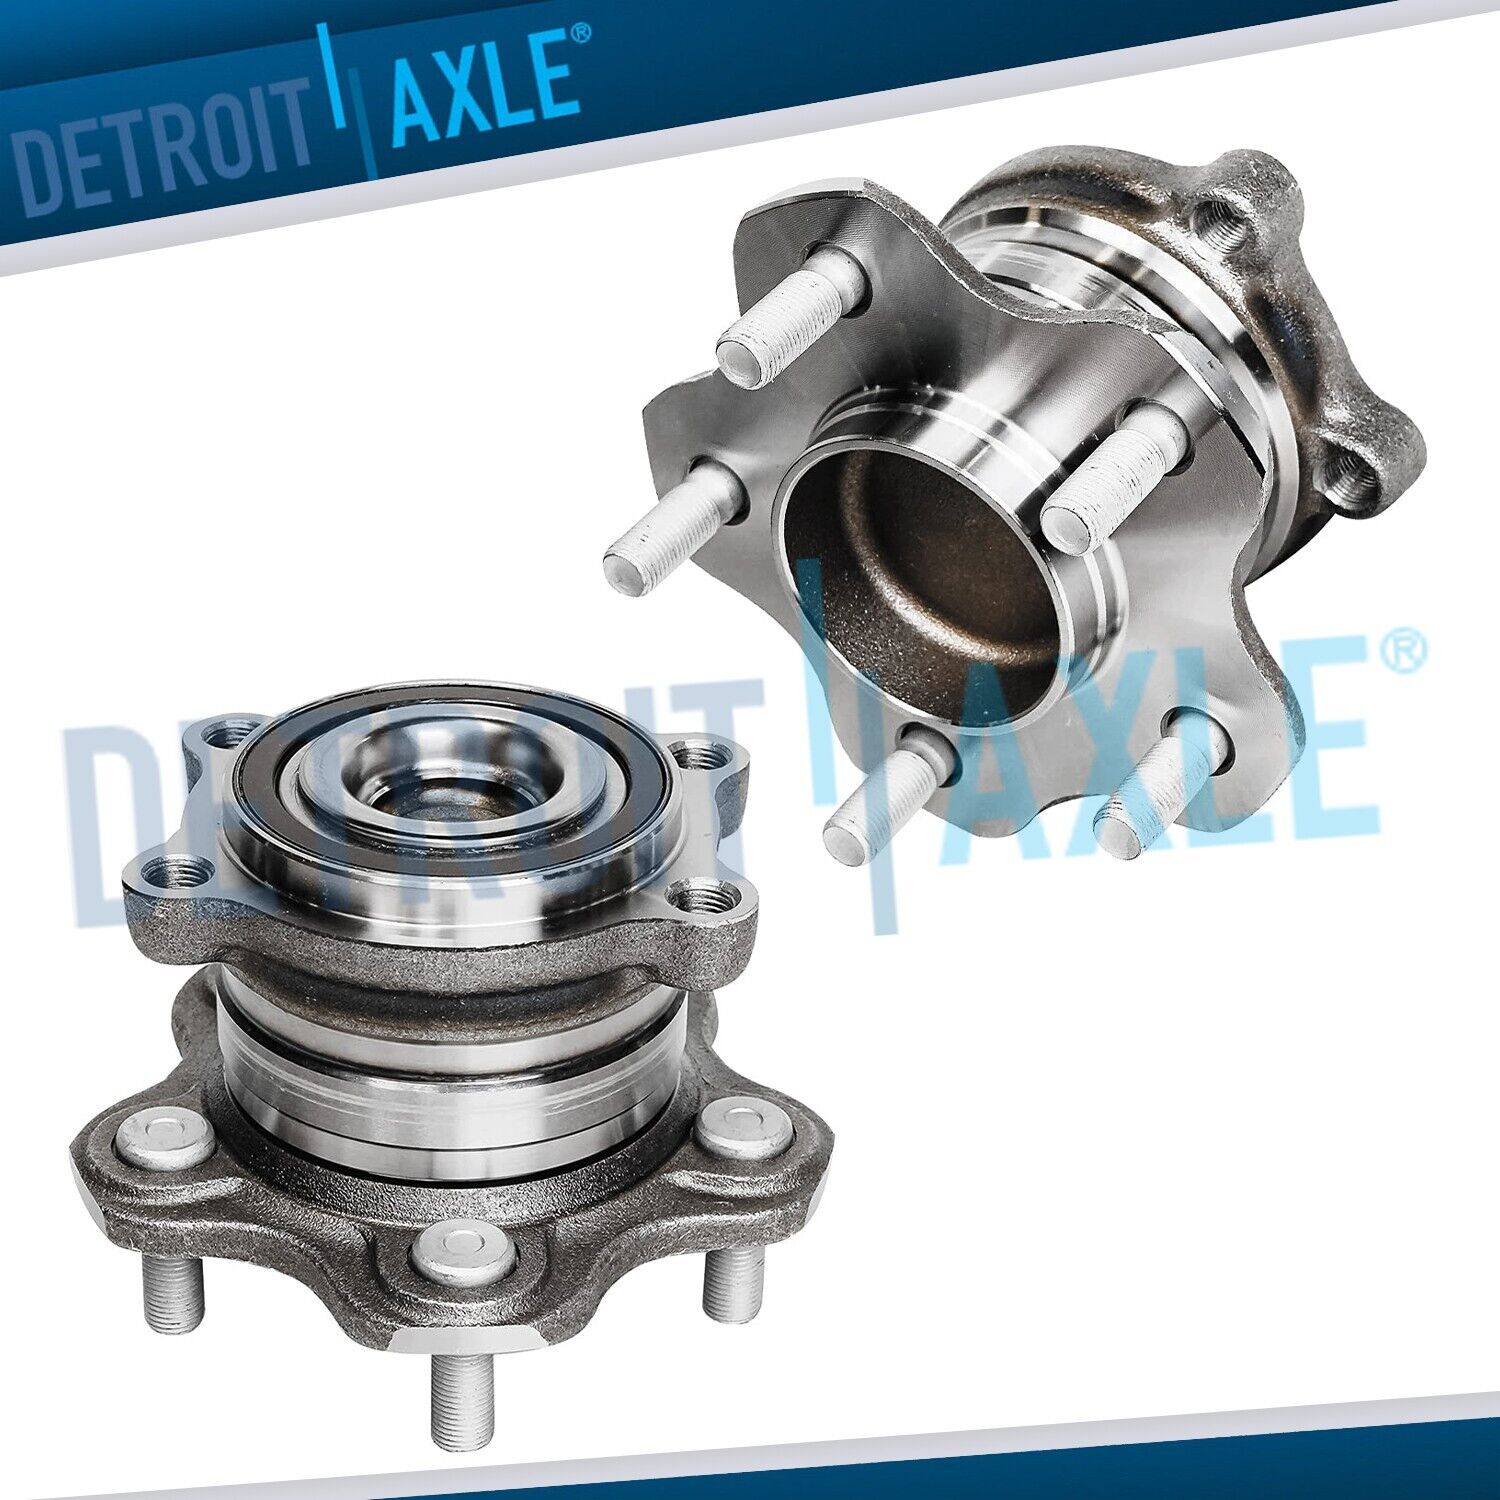 FWD REAR Wheel Bearing and Hubs Set for Nissan Altima Maxima Pathfinder Murano